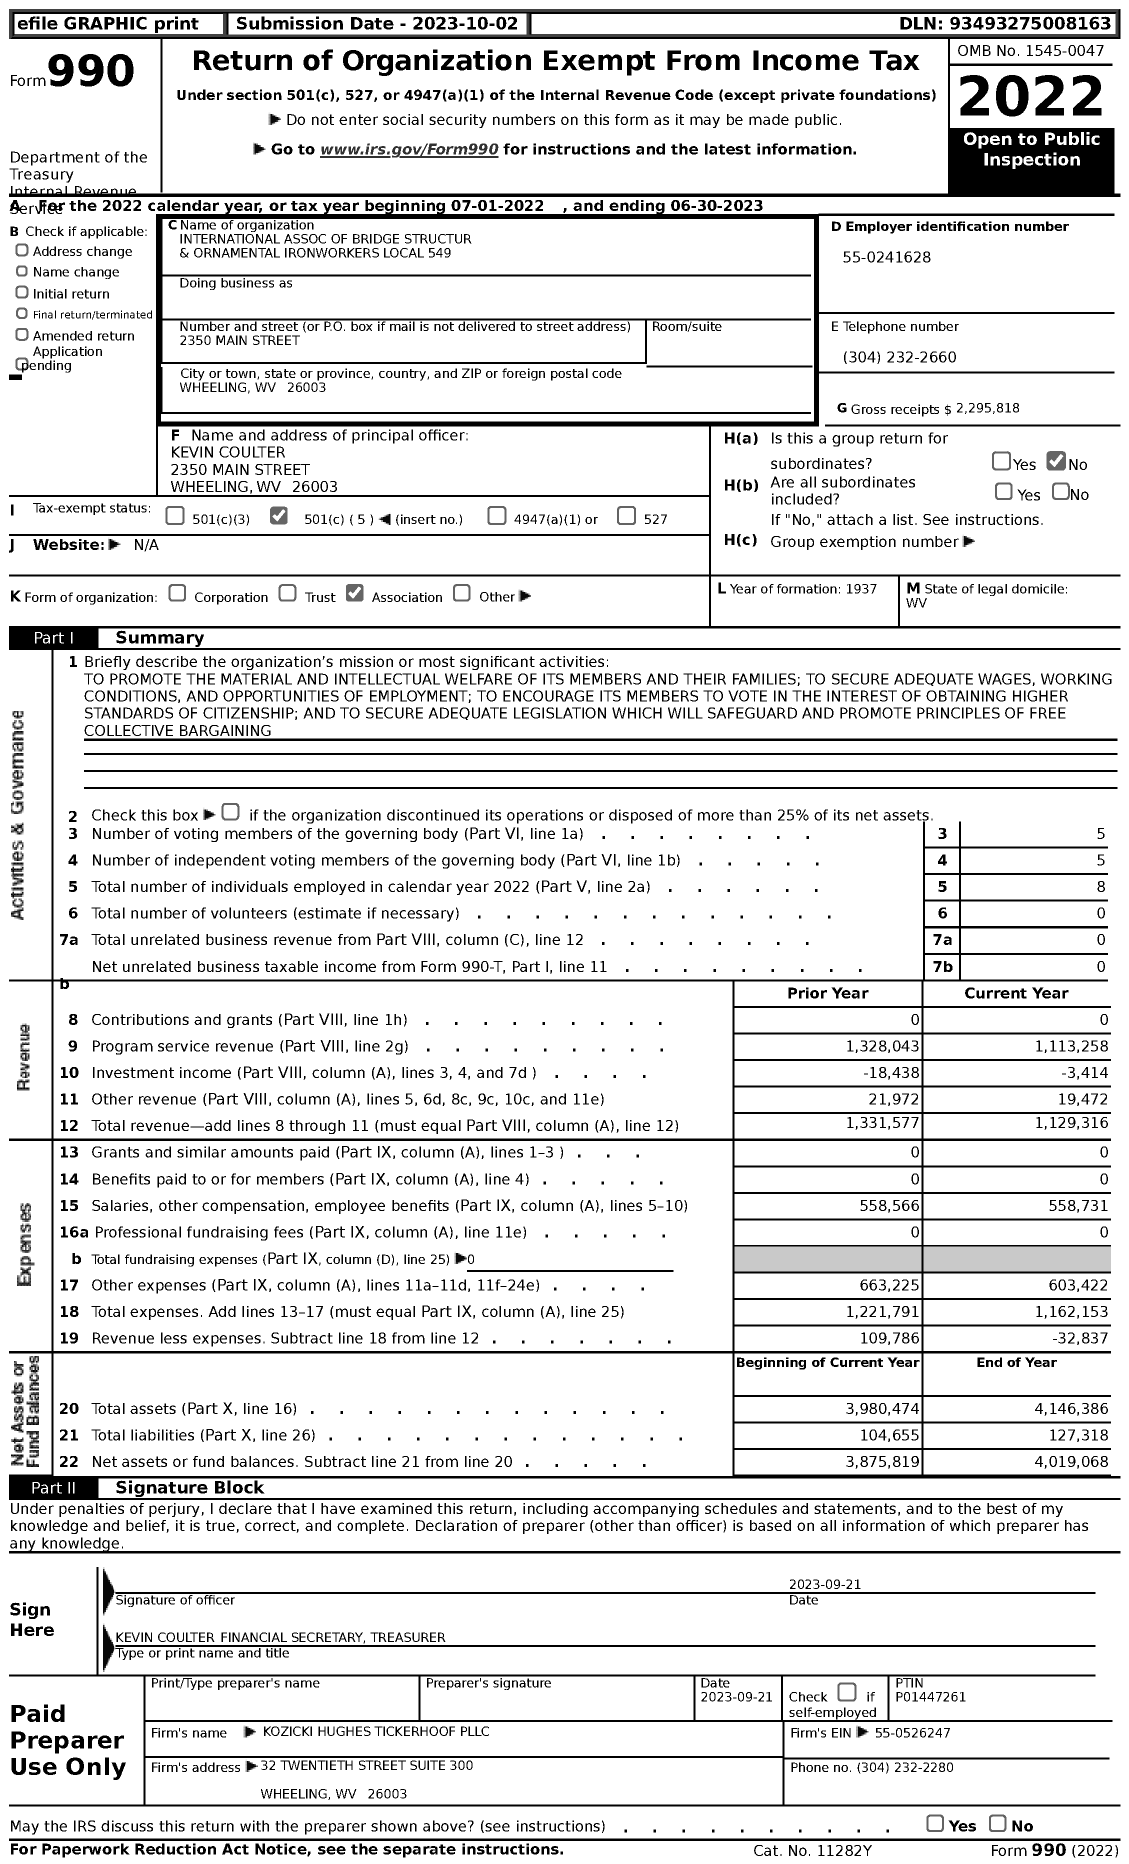 Image of first page of 2022 Form 990 for International Association of Bridge Structur and Ornamental Ironworkers Local 549